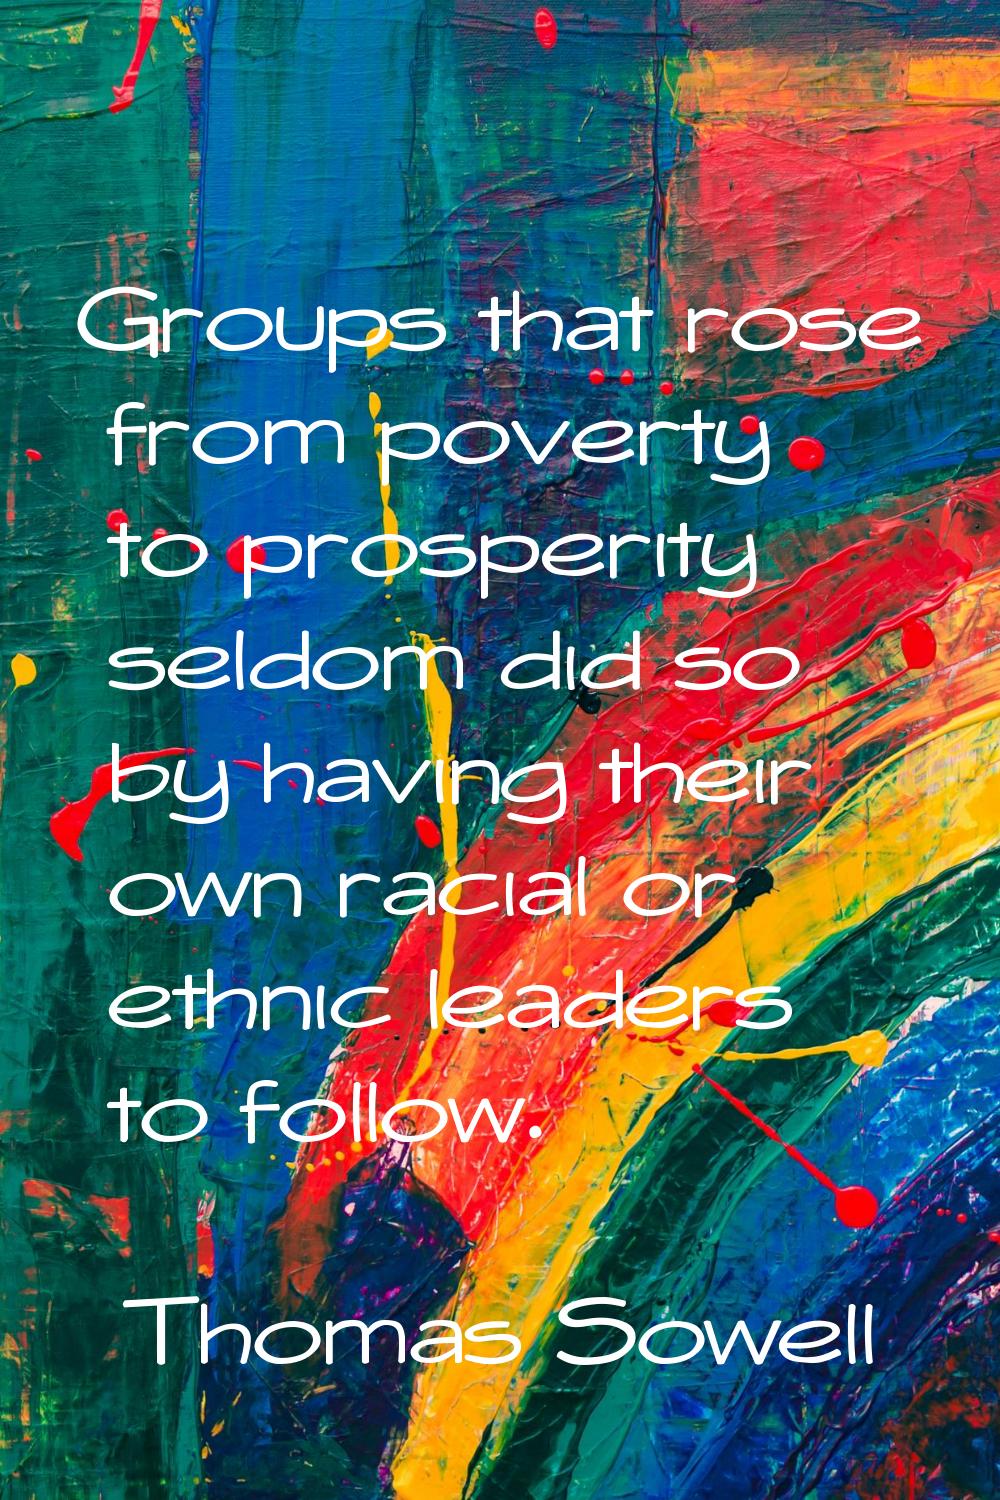 Groups that rose from poverty to prosperity seldom did so by having their own racial or ethnic lead